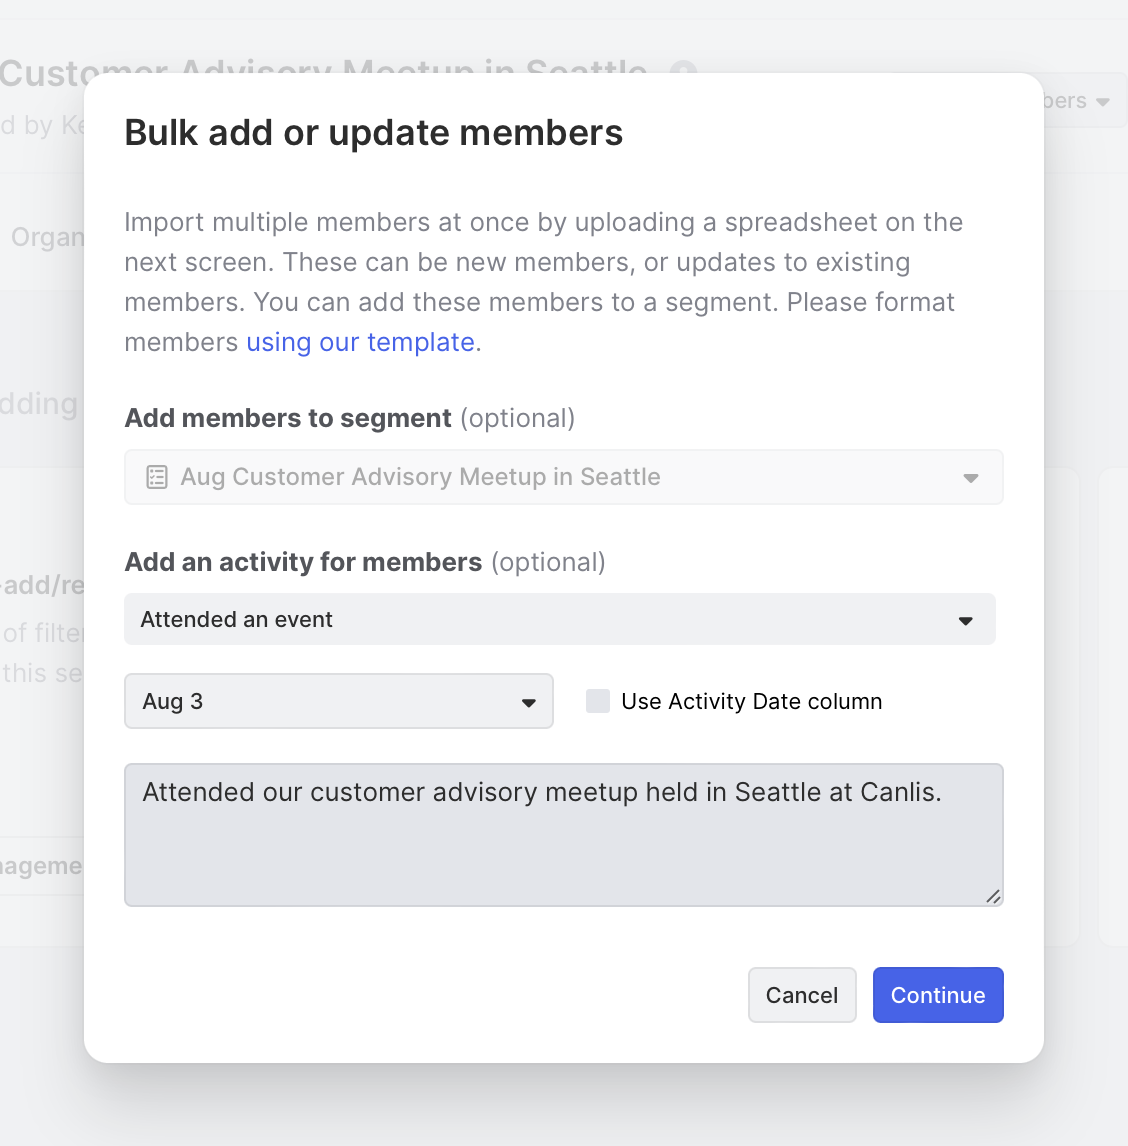 Bulk add members with event activity